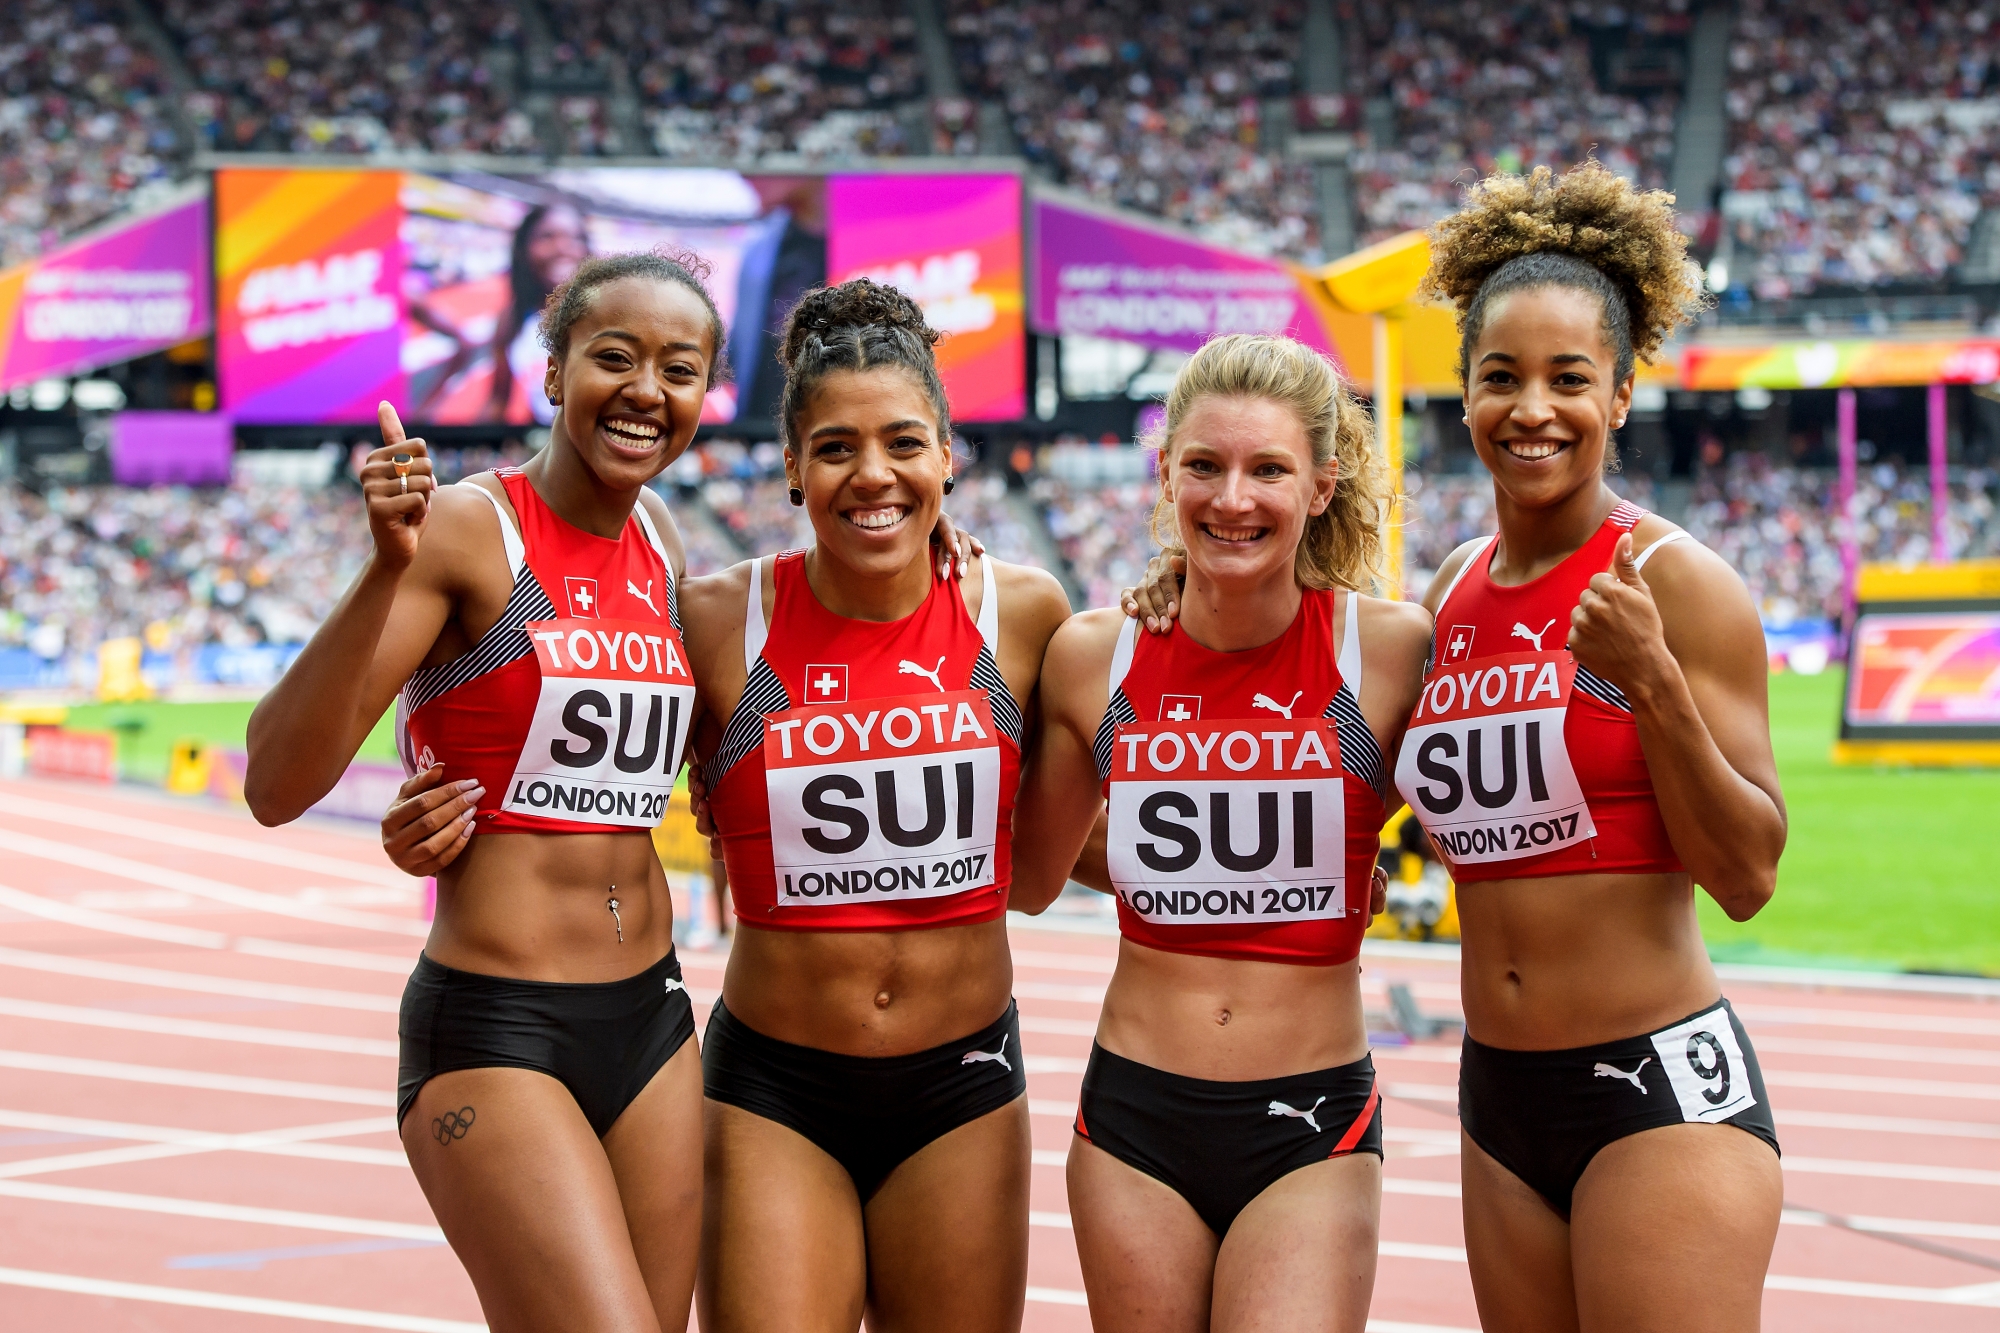 From left to right, Sarah Atcho, Mujinga Kambundji, Ajla Del Ponte, Salome Kora from Switzerland, react during the 4x100m Relay Women Qualification Round at the IAAF World Athletics Championships at the London Stadium, in the Queen Elizabeth Olympic Park in London, Britain, Saturday, August 12, 2017. (KEYSTONE/Jean-Christophe Bott) BRITAIN ATHLETICS WORLD CHAMPIONSHIPS